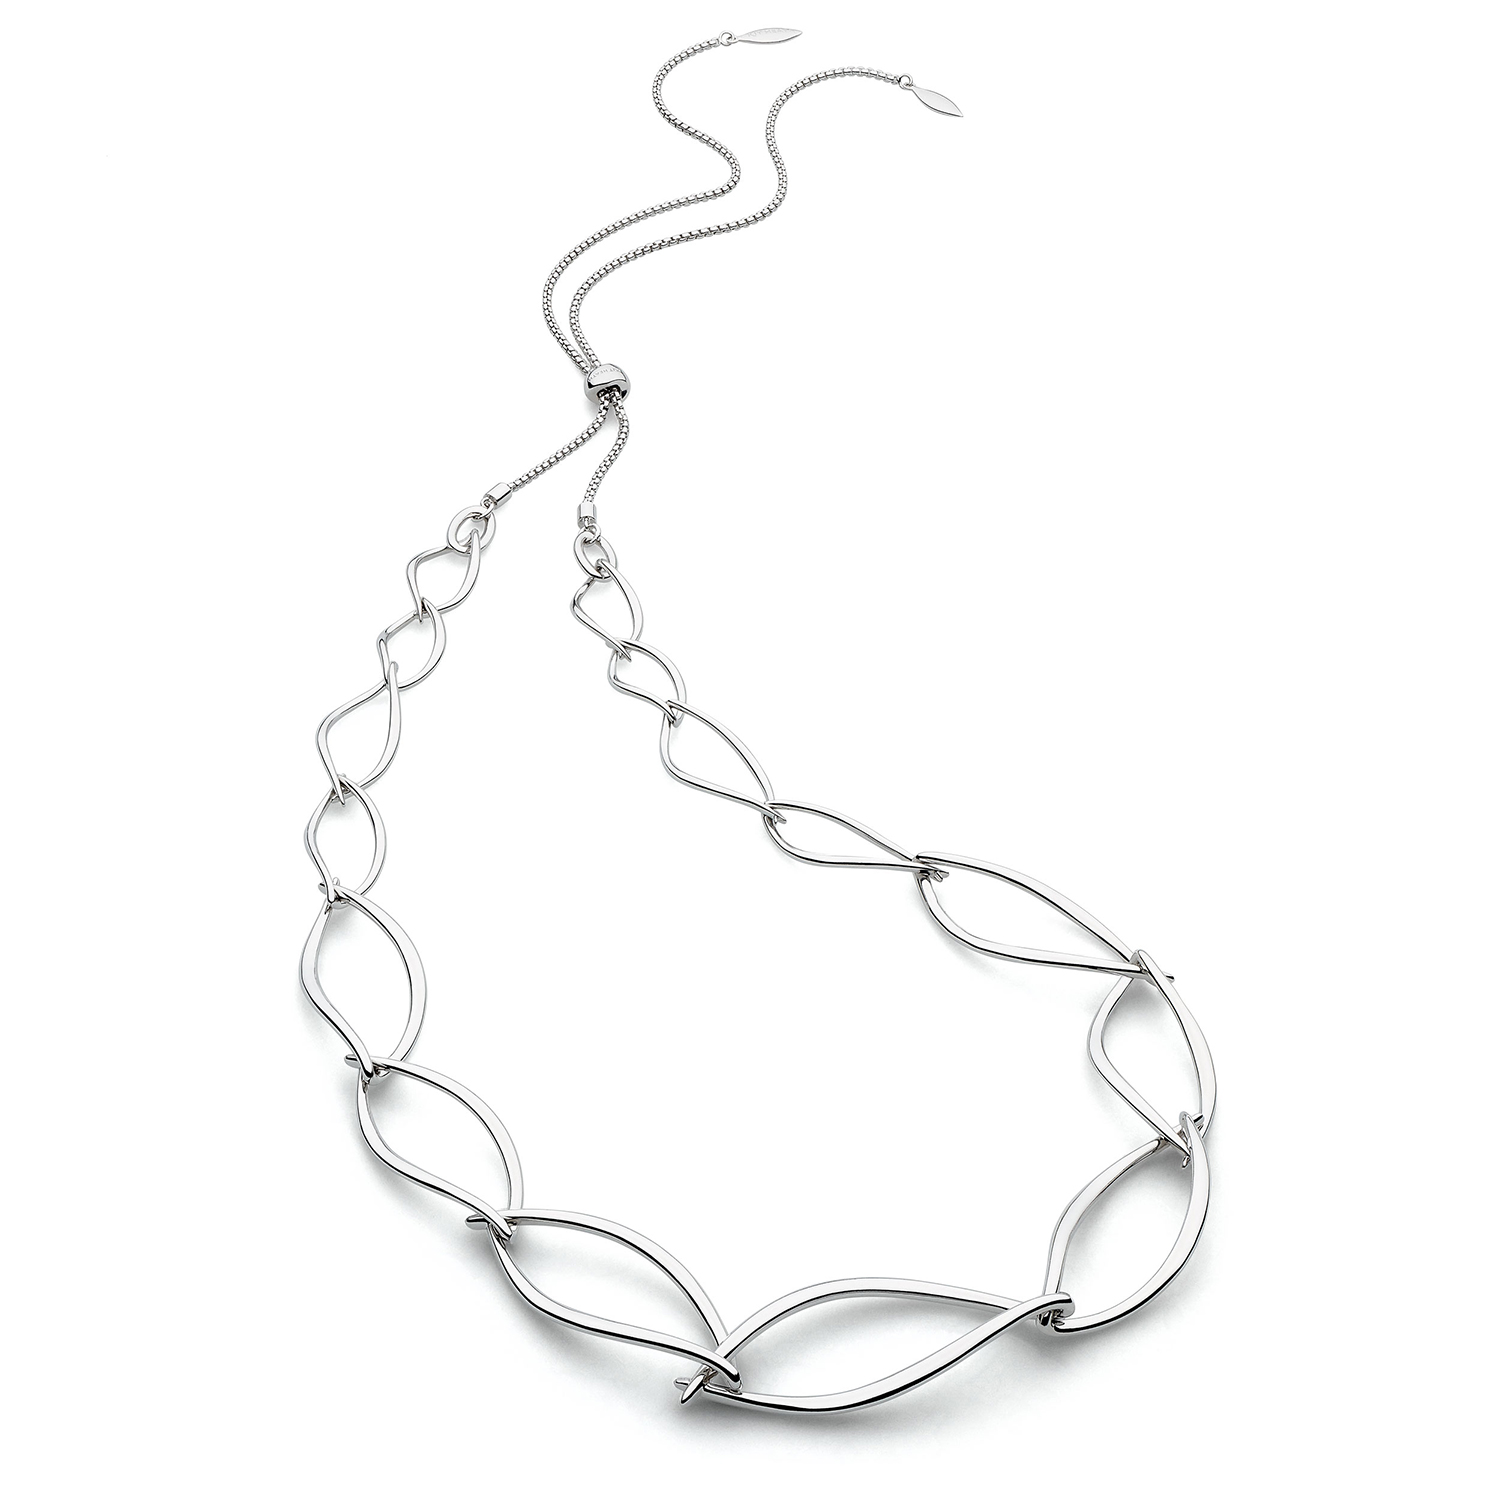 INSTORE Design Awards 2022 &#8211; Silver Jewelry Under $1,000